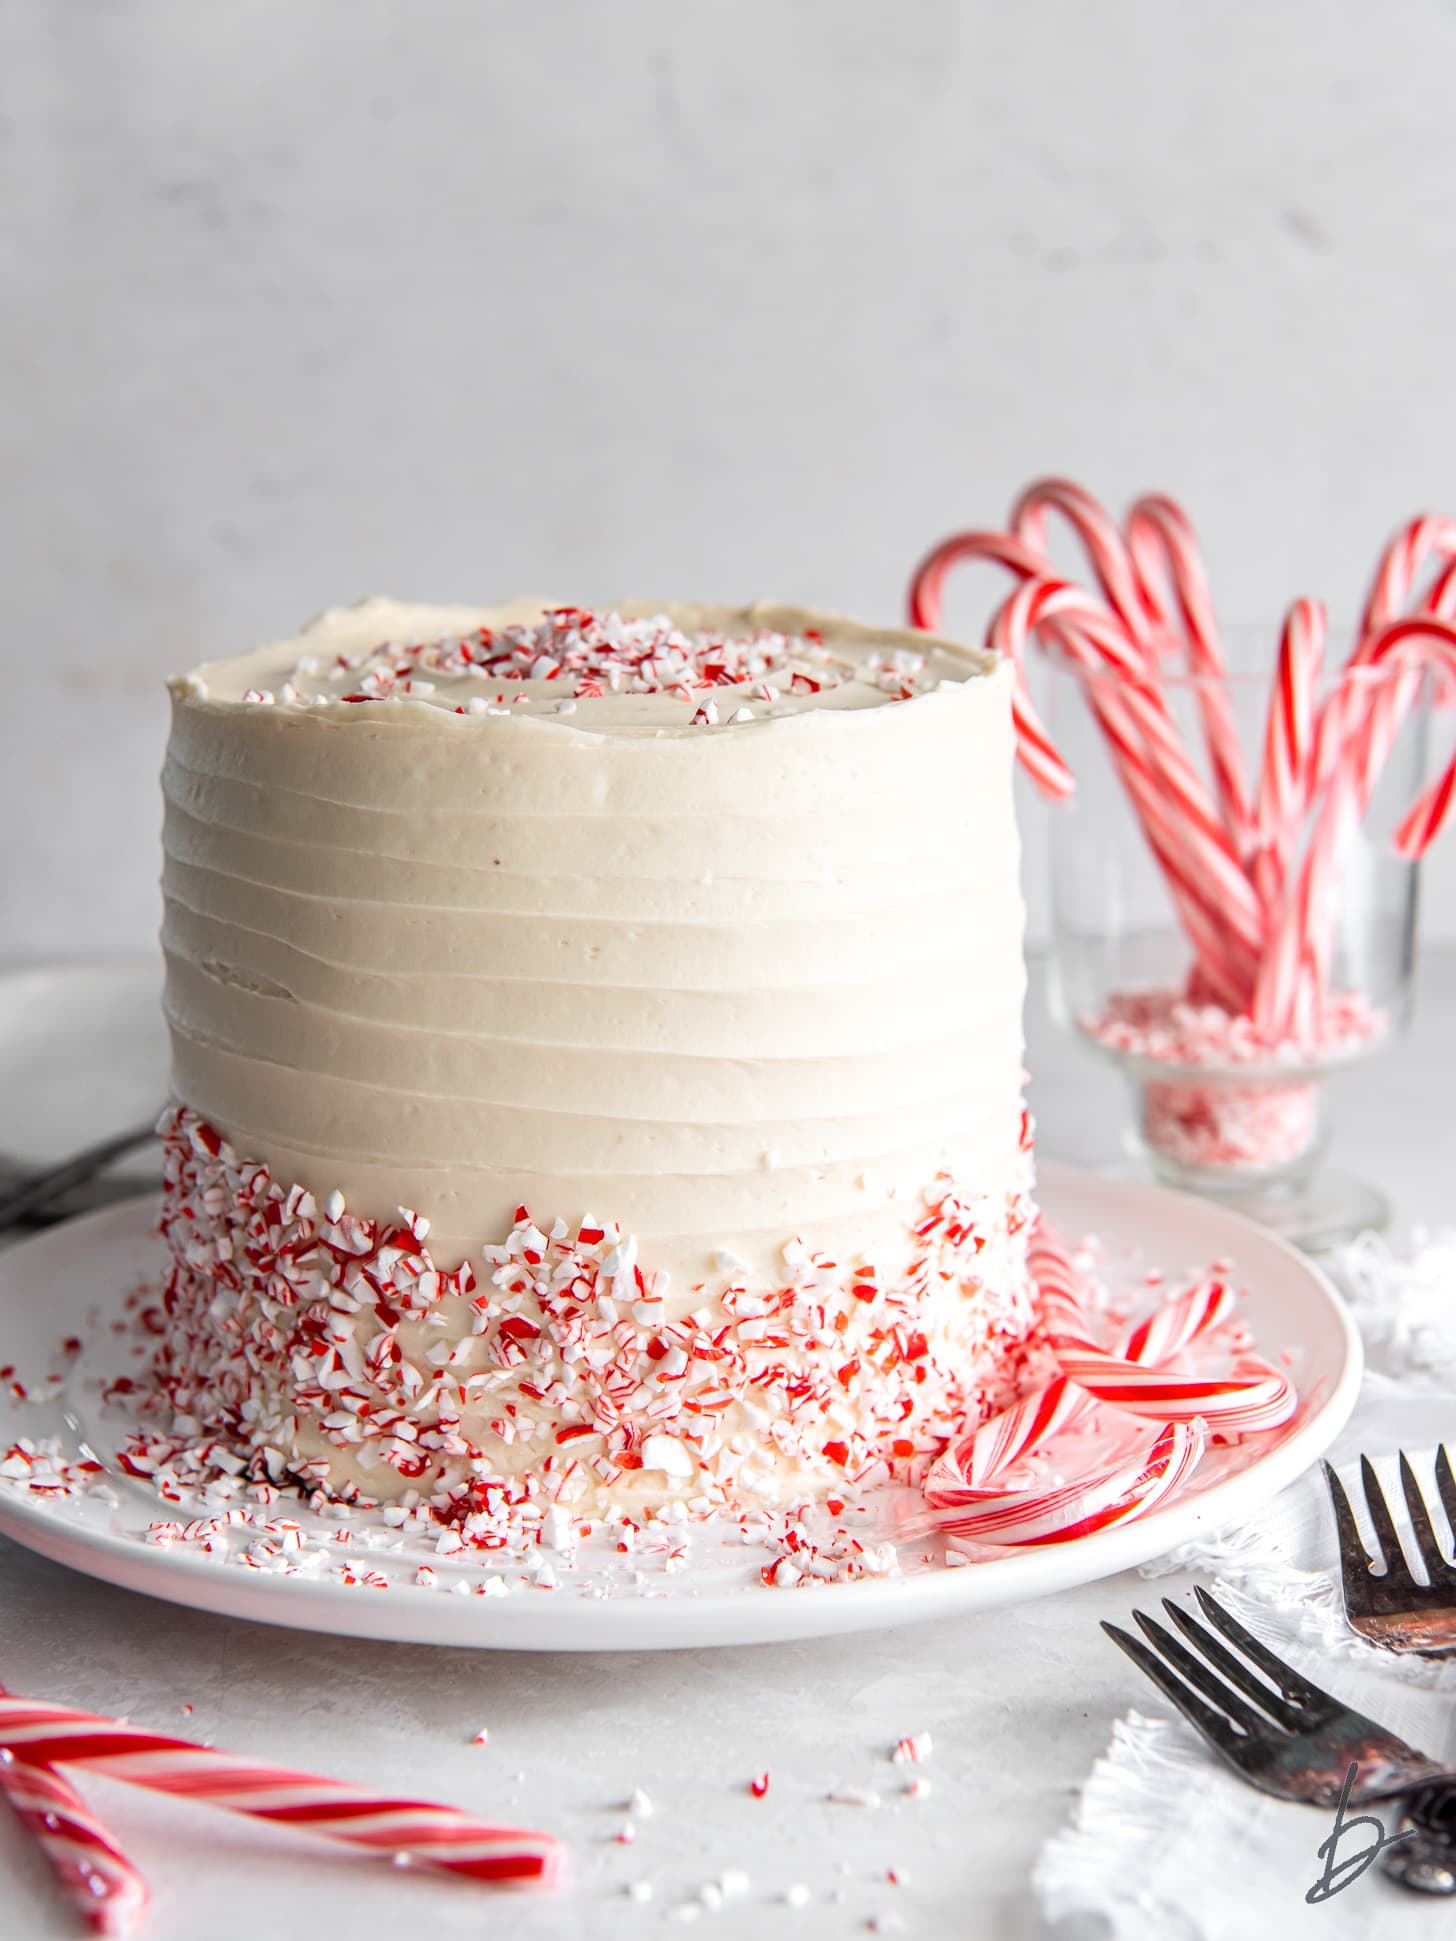 chocolate peppermint cake with white chocolate buttercream frosting and crushed peppermint candy as garnish.